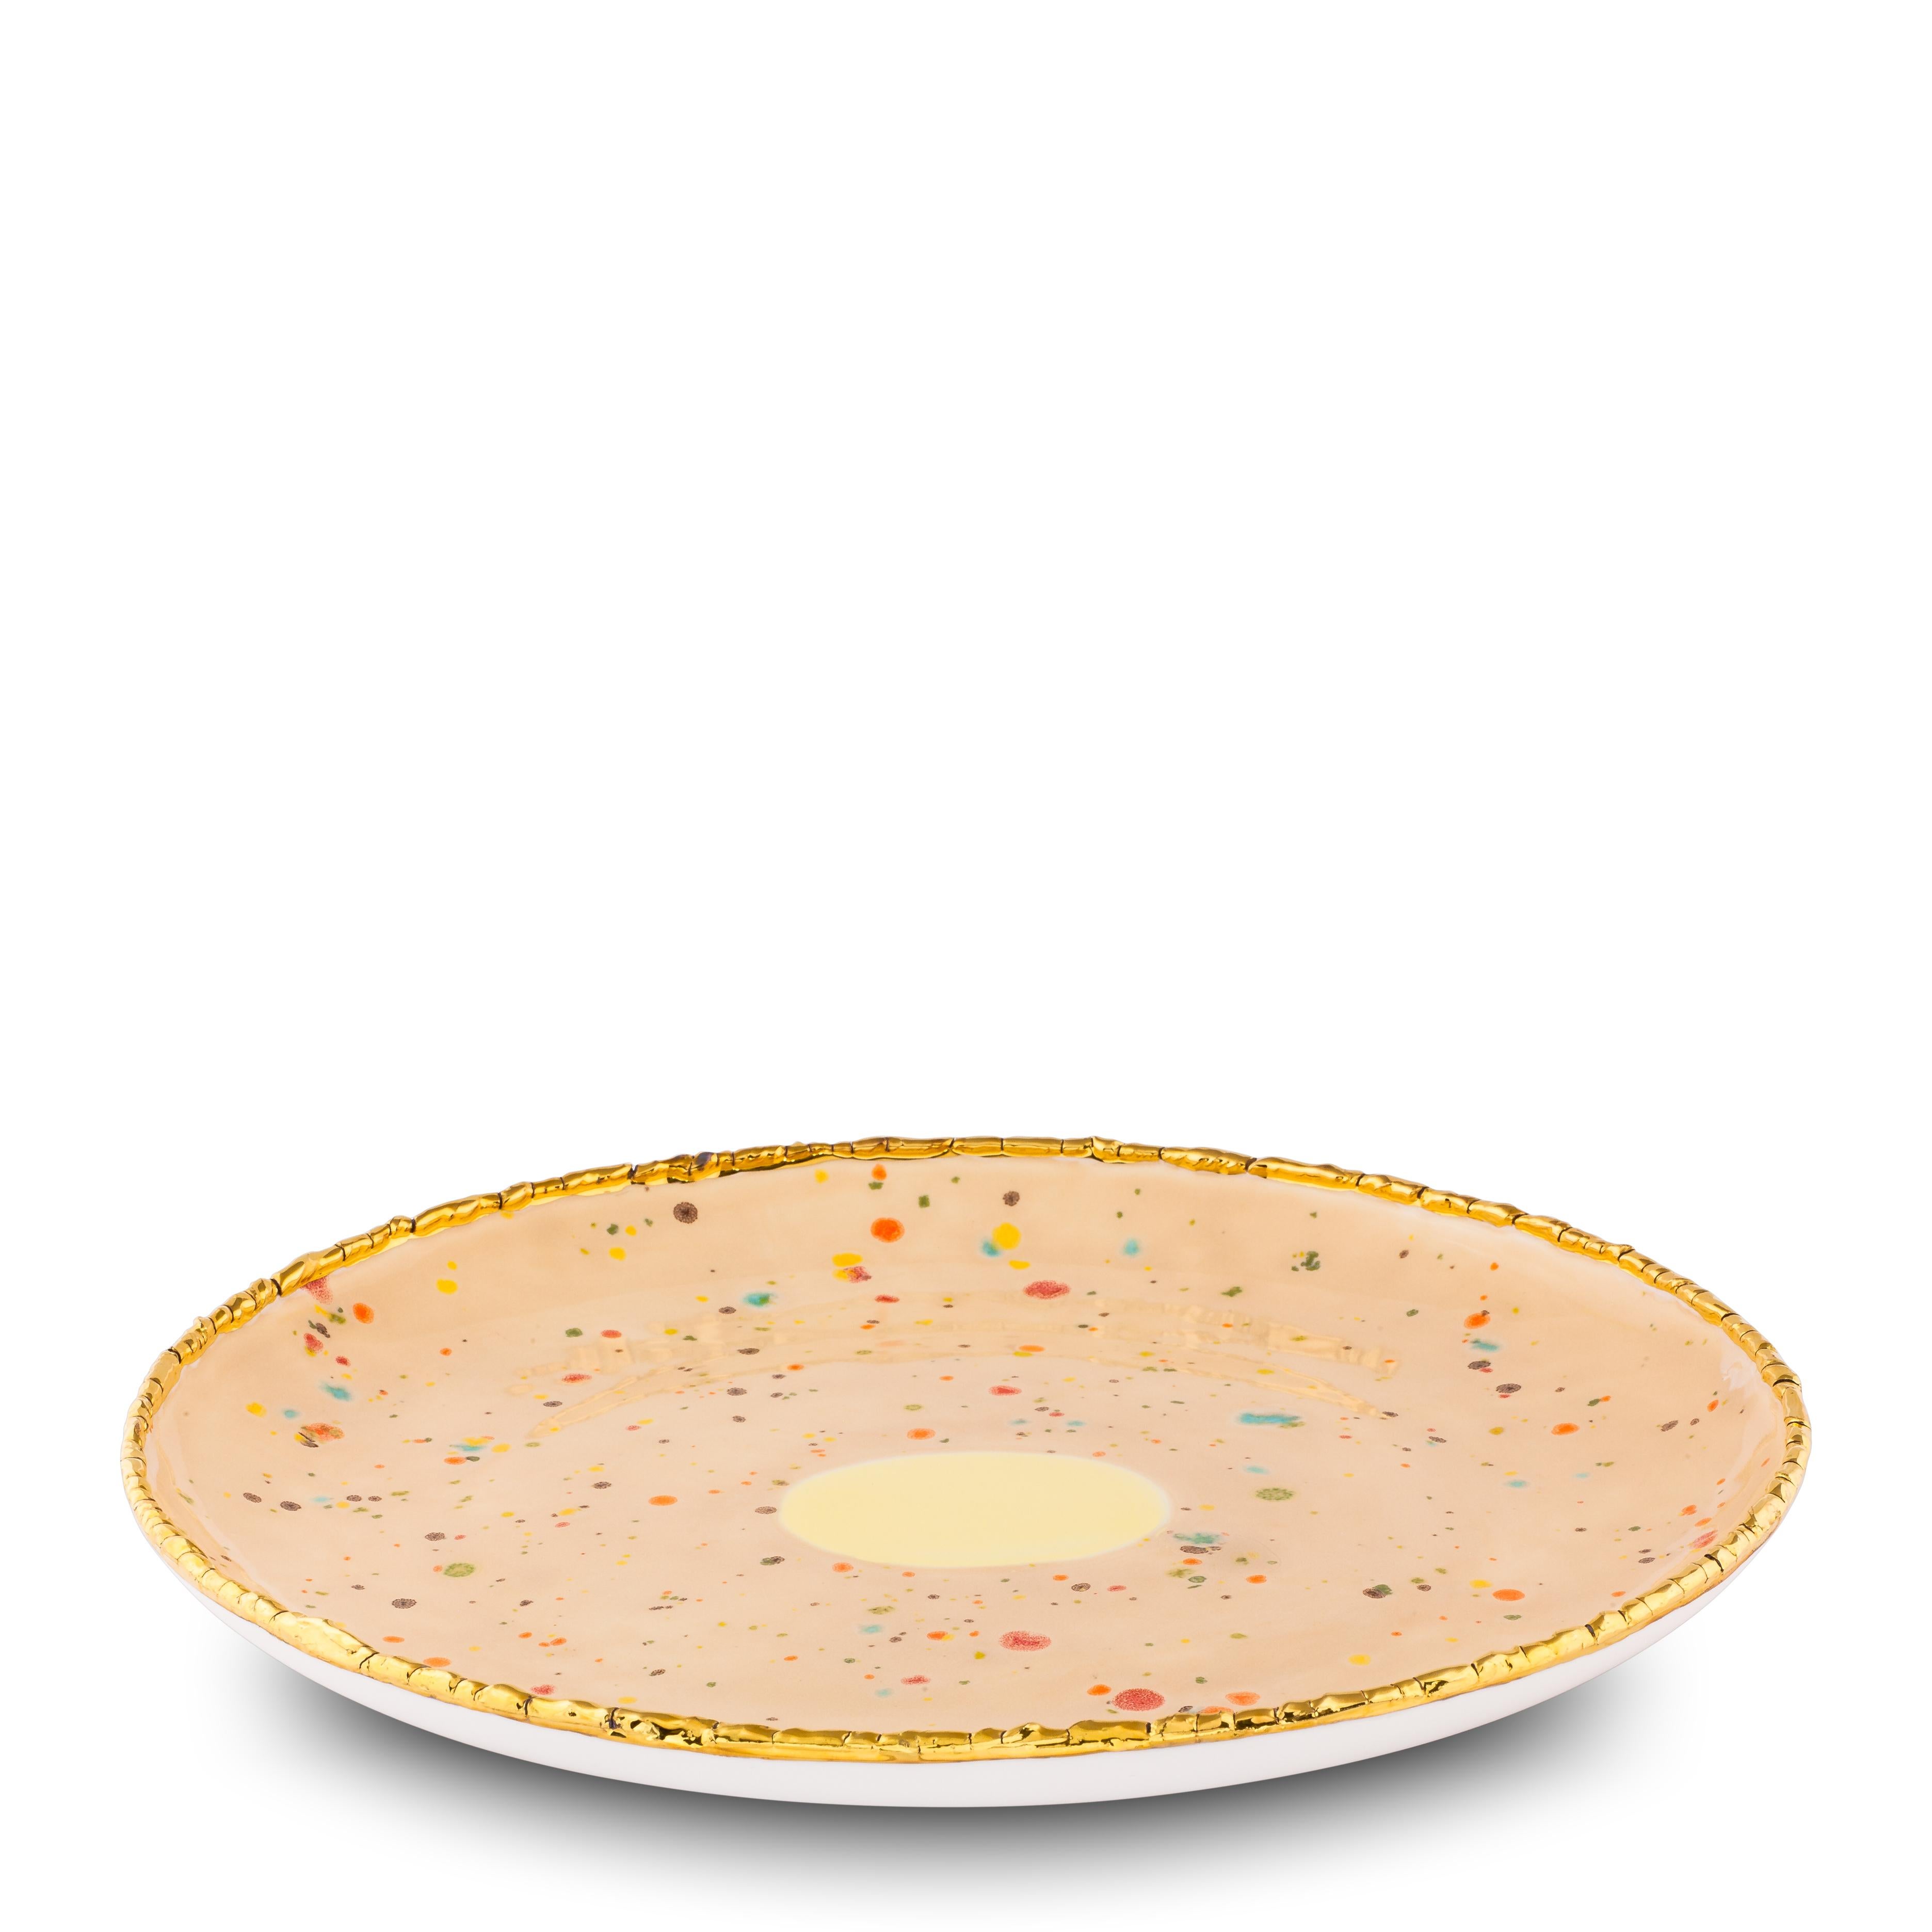 Hand painted in Italy from the finest porcelain, this craquelé edge coupe platter from the Chestnut collection has an original golden crackled rim emphasizing the warm sandy surface covered with little multicolor dots and the bright yellow splotch